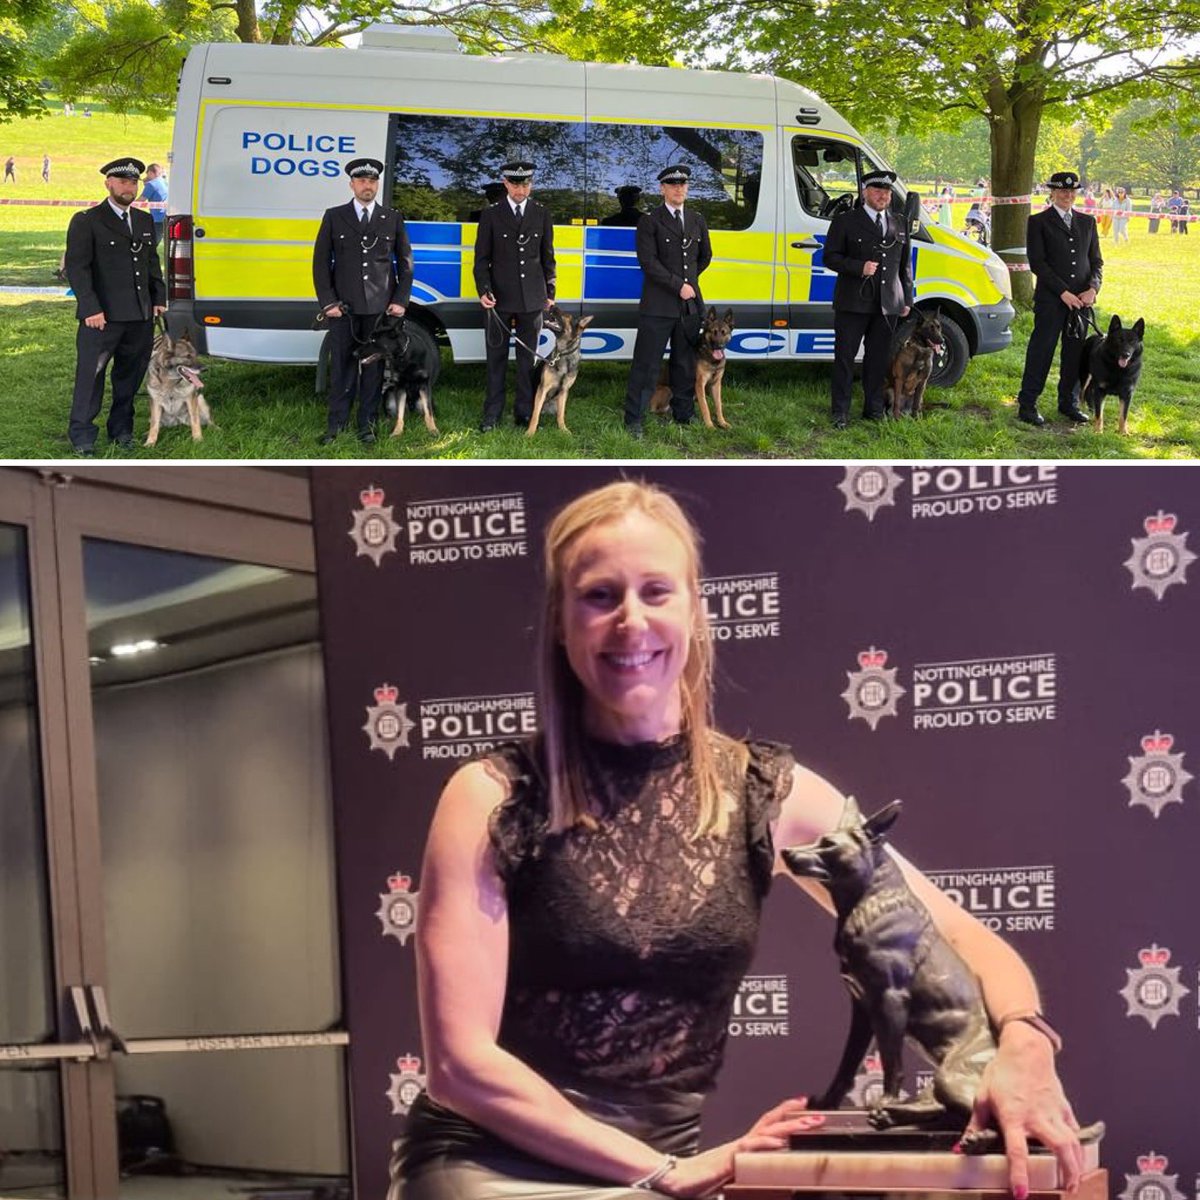 We are proud of our @MetTaskforce dog & handler teams who competed at the National police dog trials

The most enthusiastic team award went PD Buster and PC Uncle who said she hopes this award inspires others to compete in the future. 

Well done teams! 

🐶🐾💙